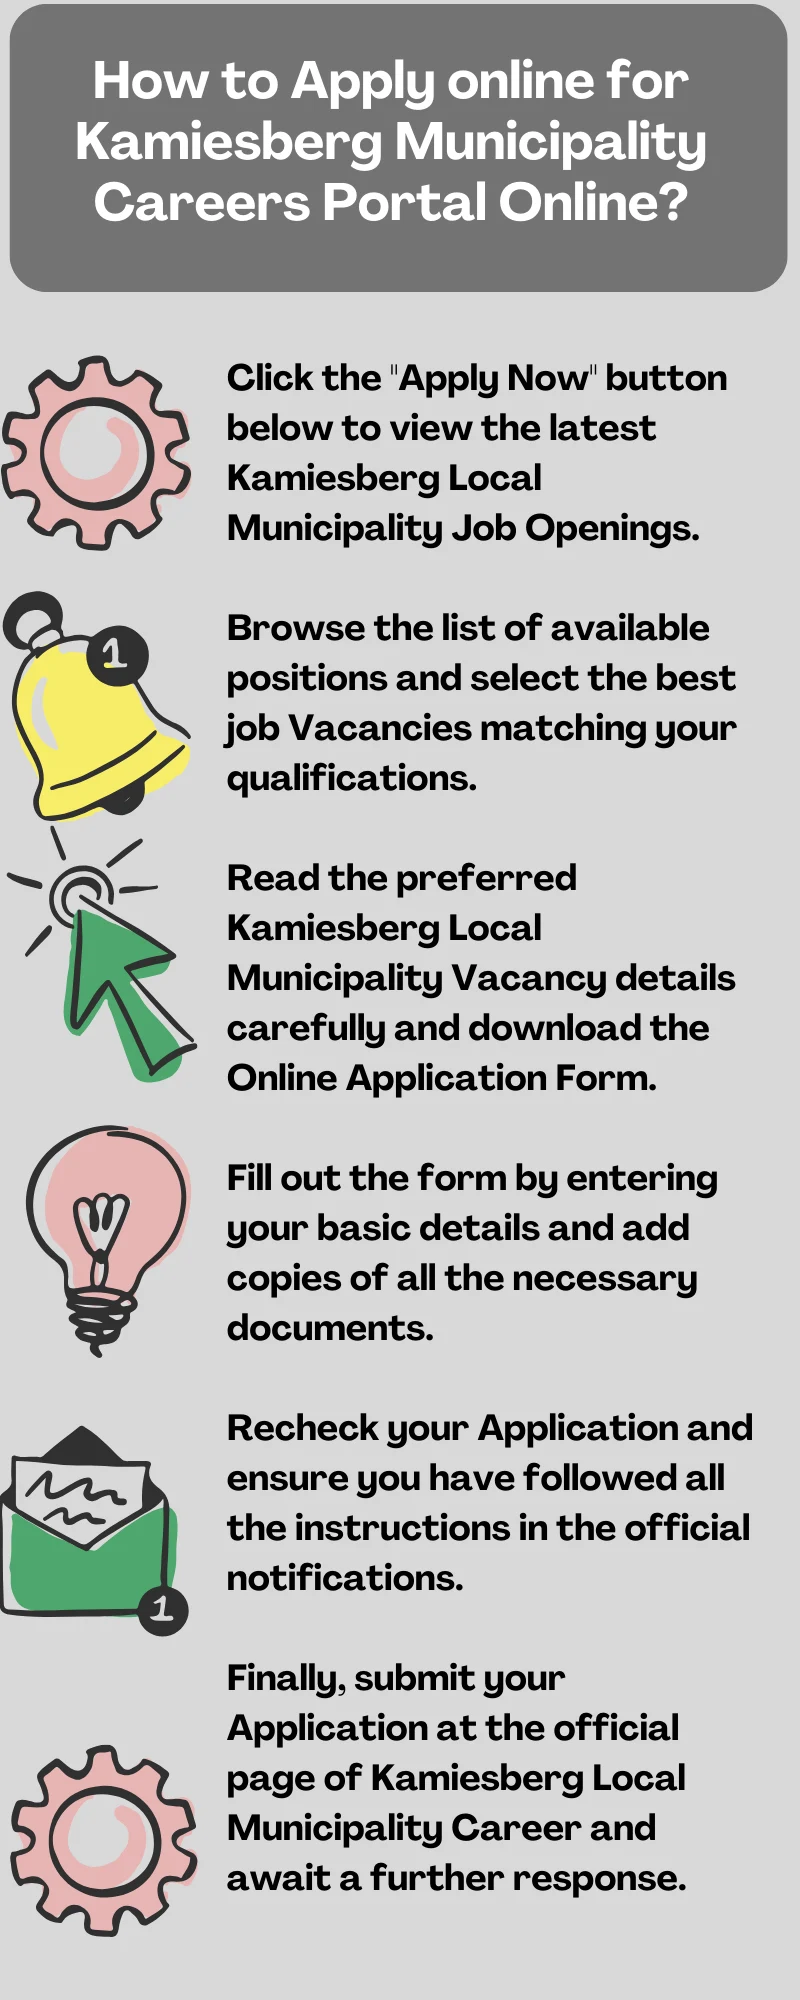 How to Apply online for Kamiesberg Municipality Careers Portal Online?